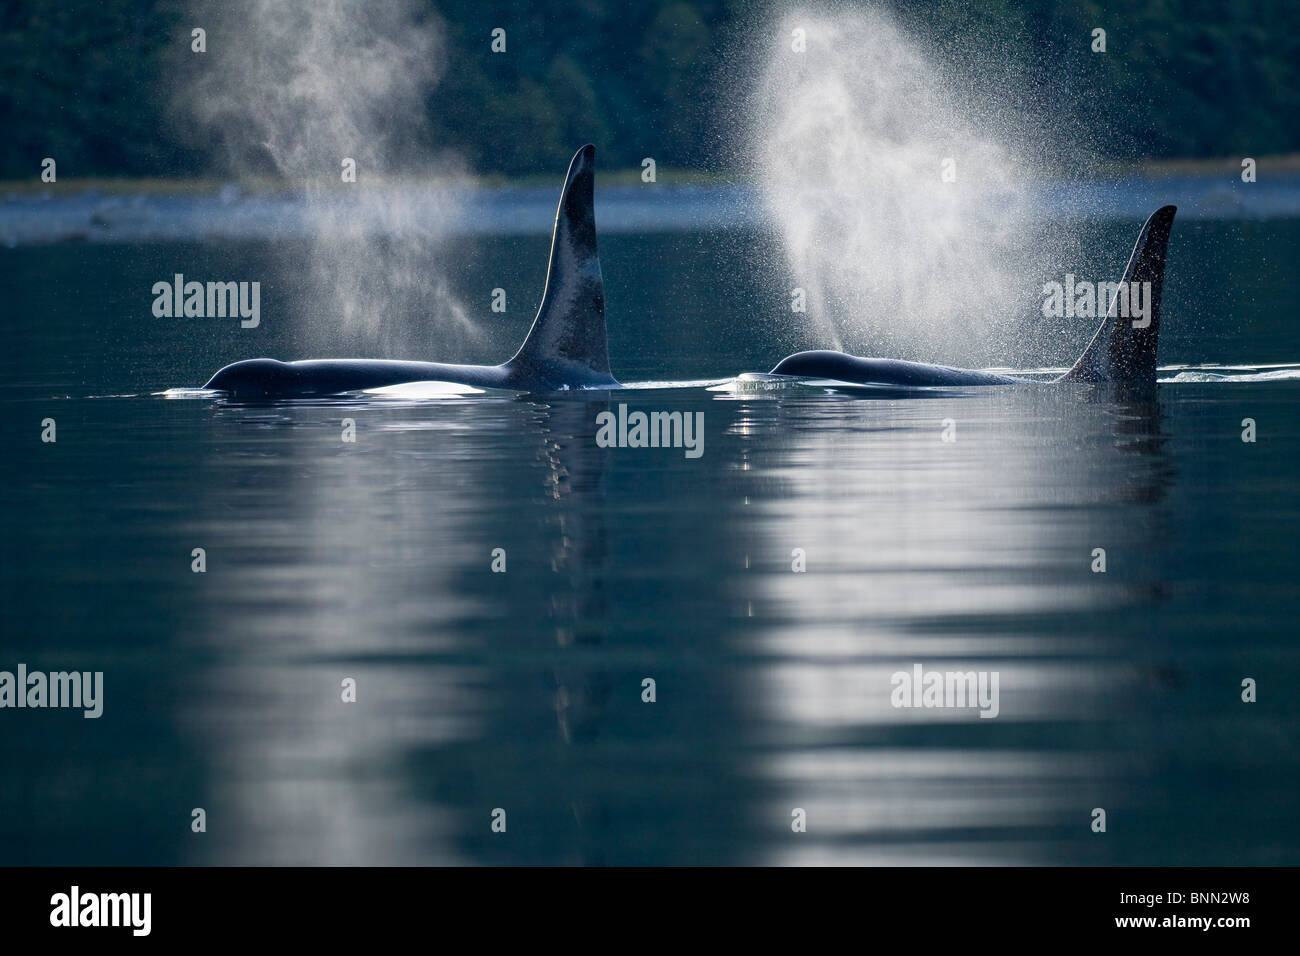 Orca Whales exhale (blows) as they surfaces in Alaska's Inside Passage, Alaska Stock Photo